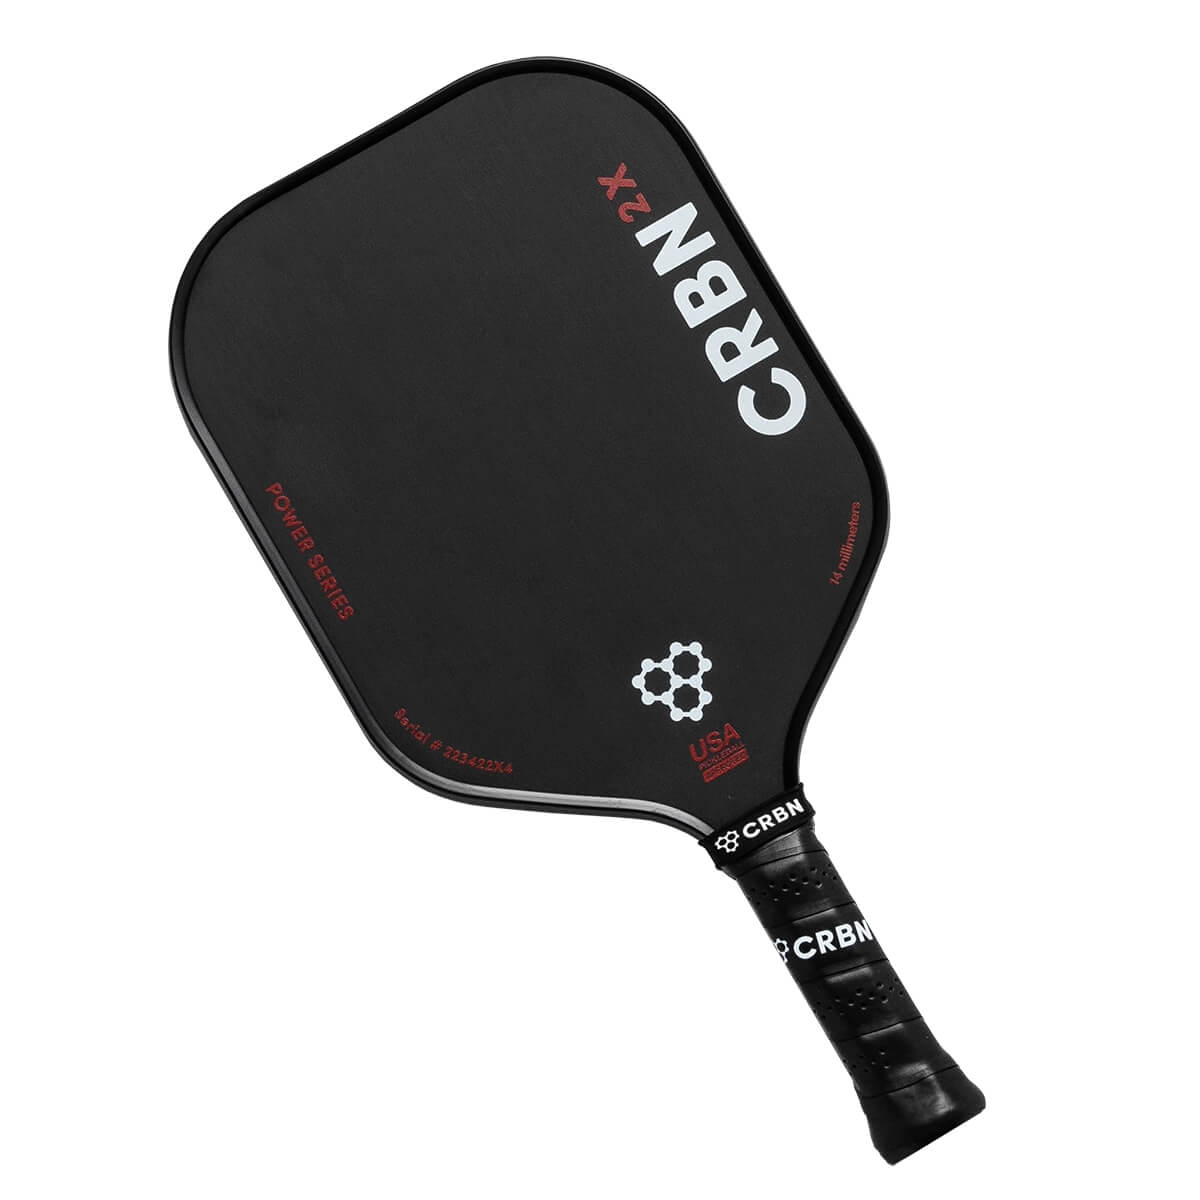 CRBN 2X Power Series Square Pickleball Paddle